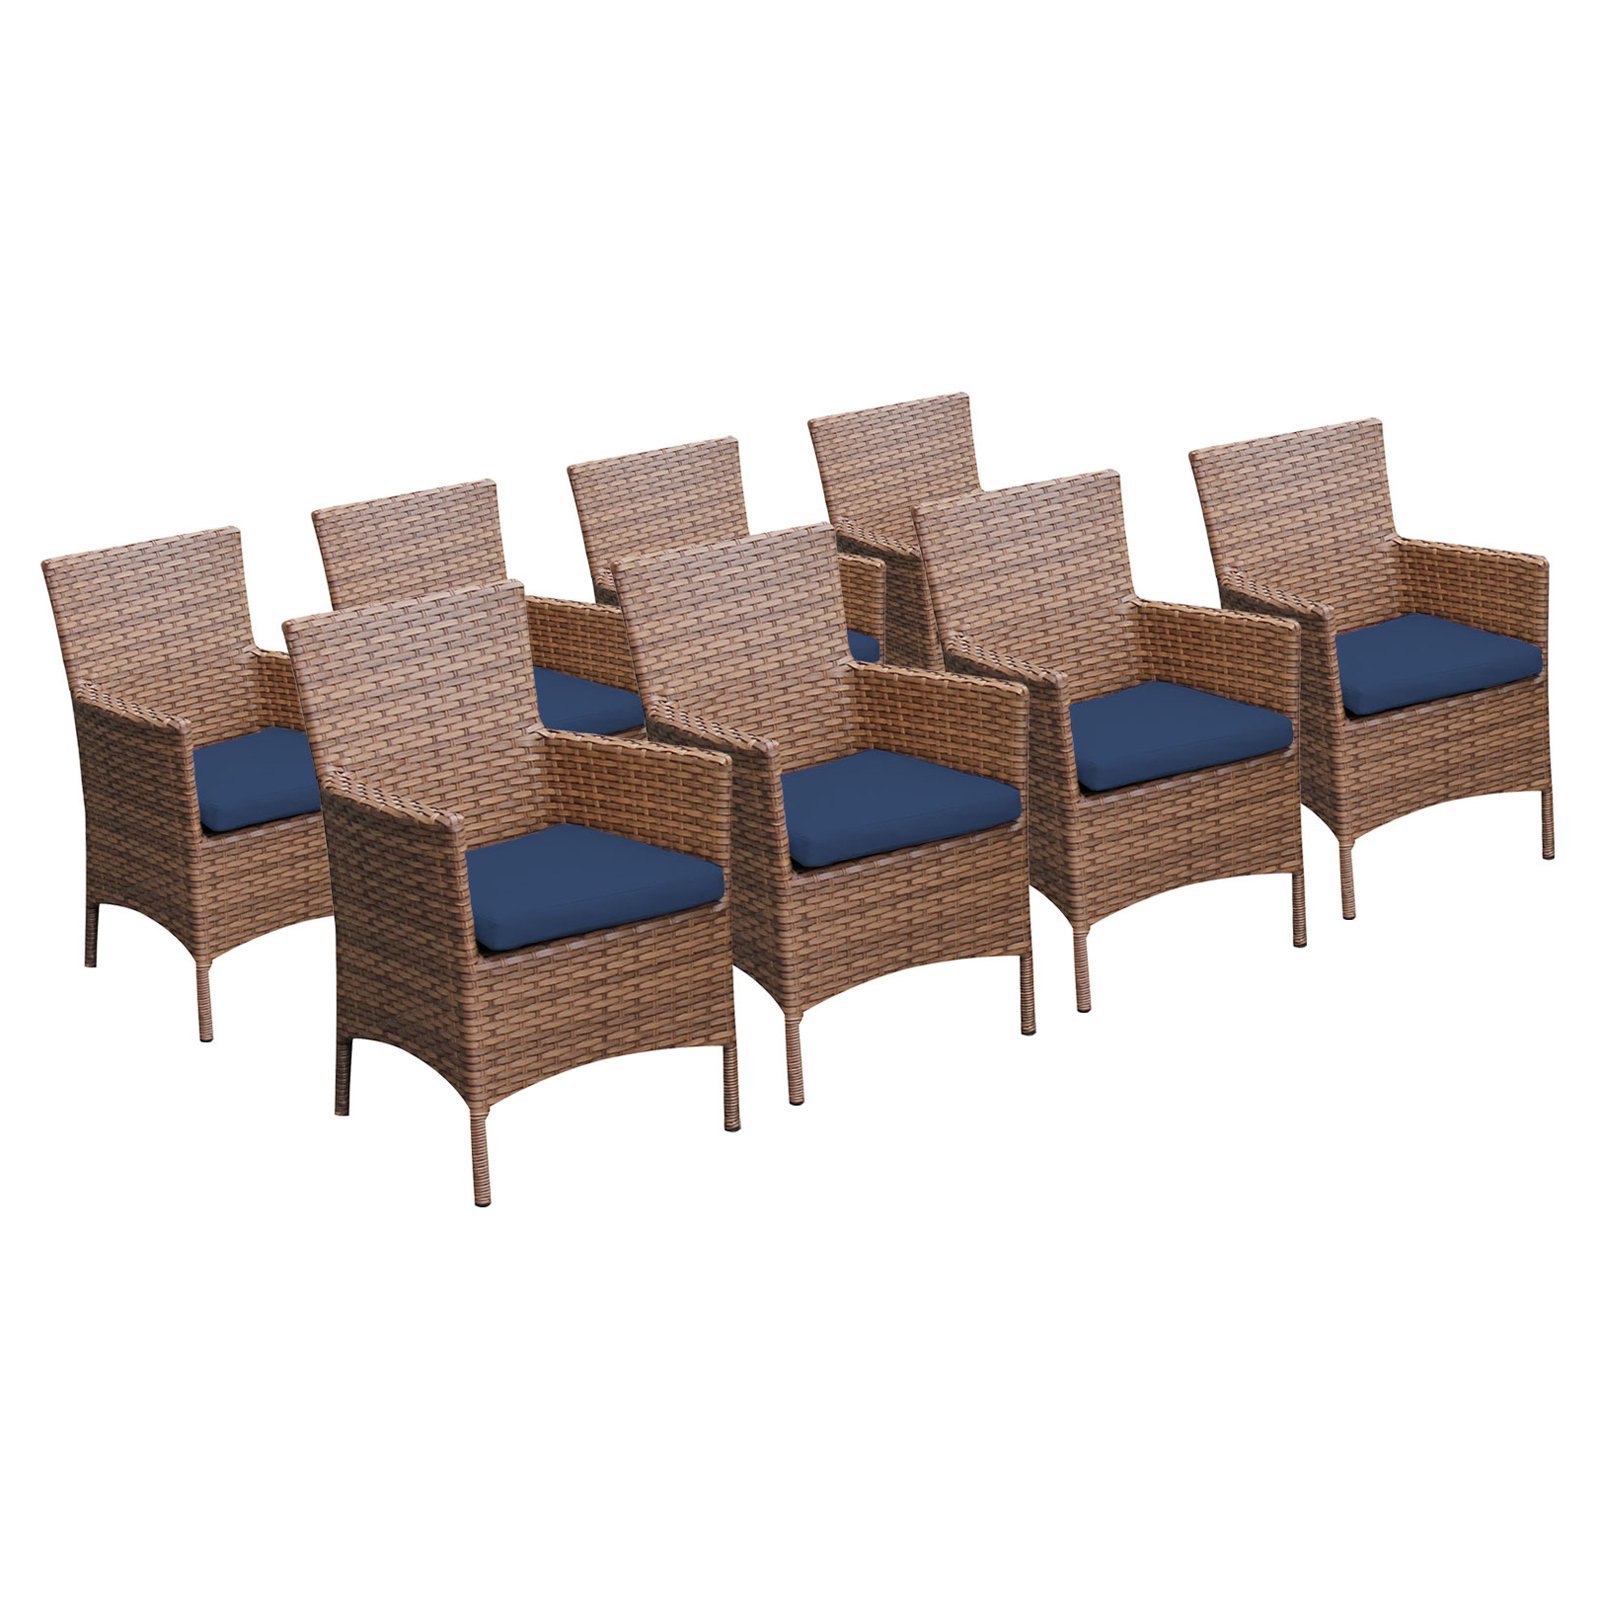 TK Classics Laguna Outdoor Dining Chairs - Set of 8 Chairs with 16 Cushion Covers - image 1 of 2